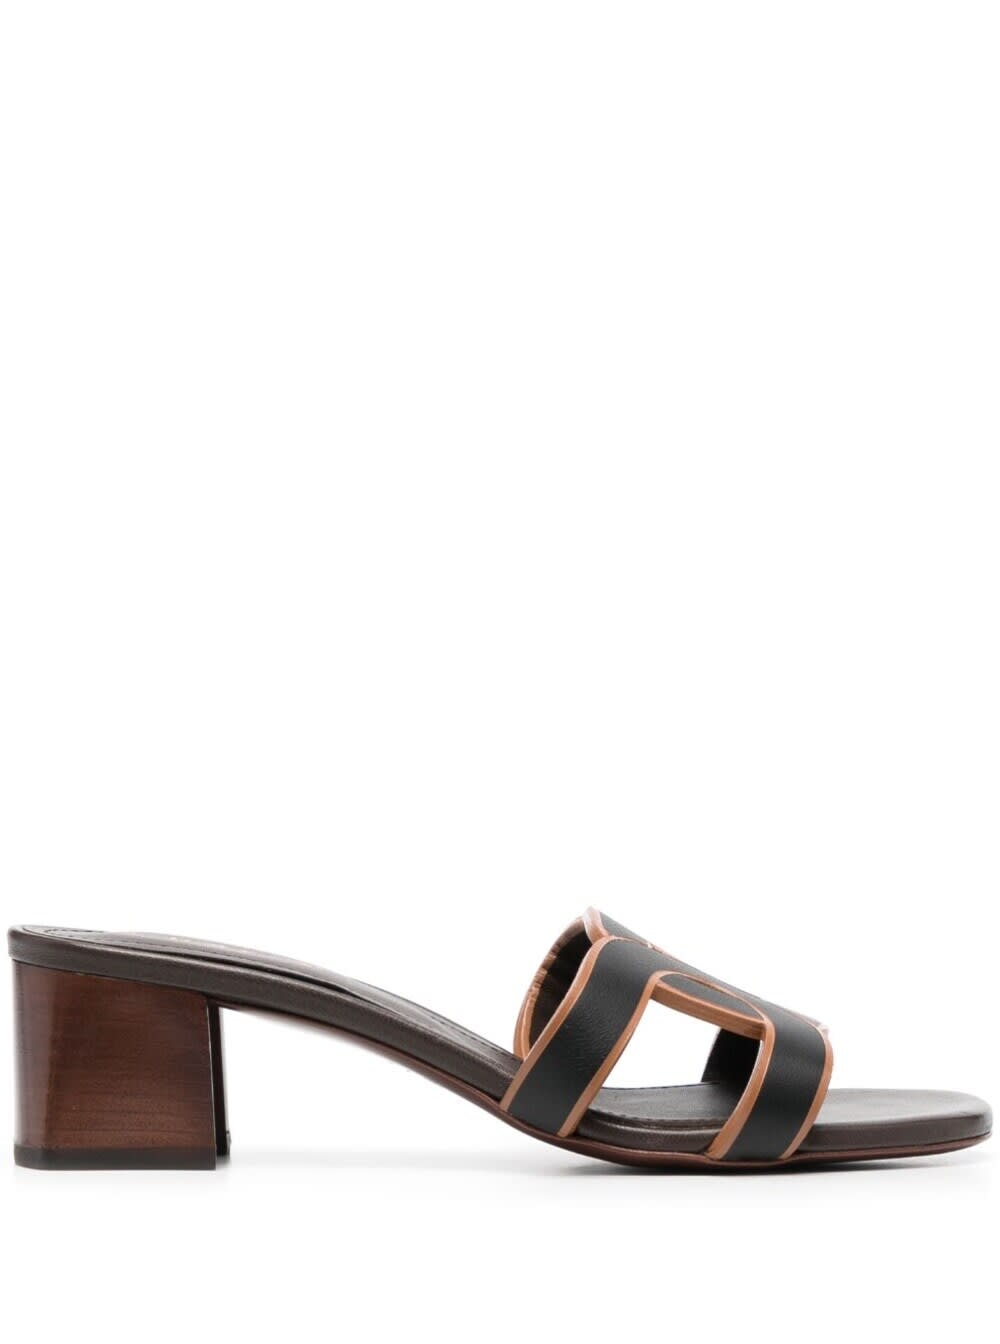 TOD'S BLACK AND BROWN WOVEN MULES IN LEATHER WOMAN